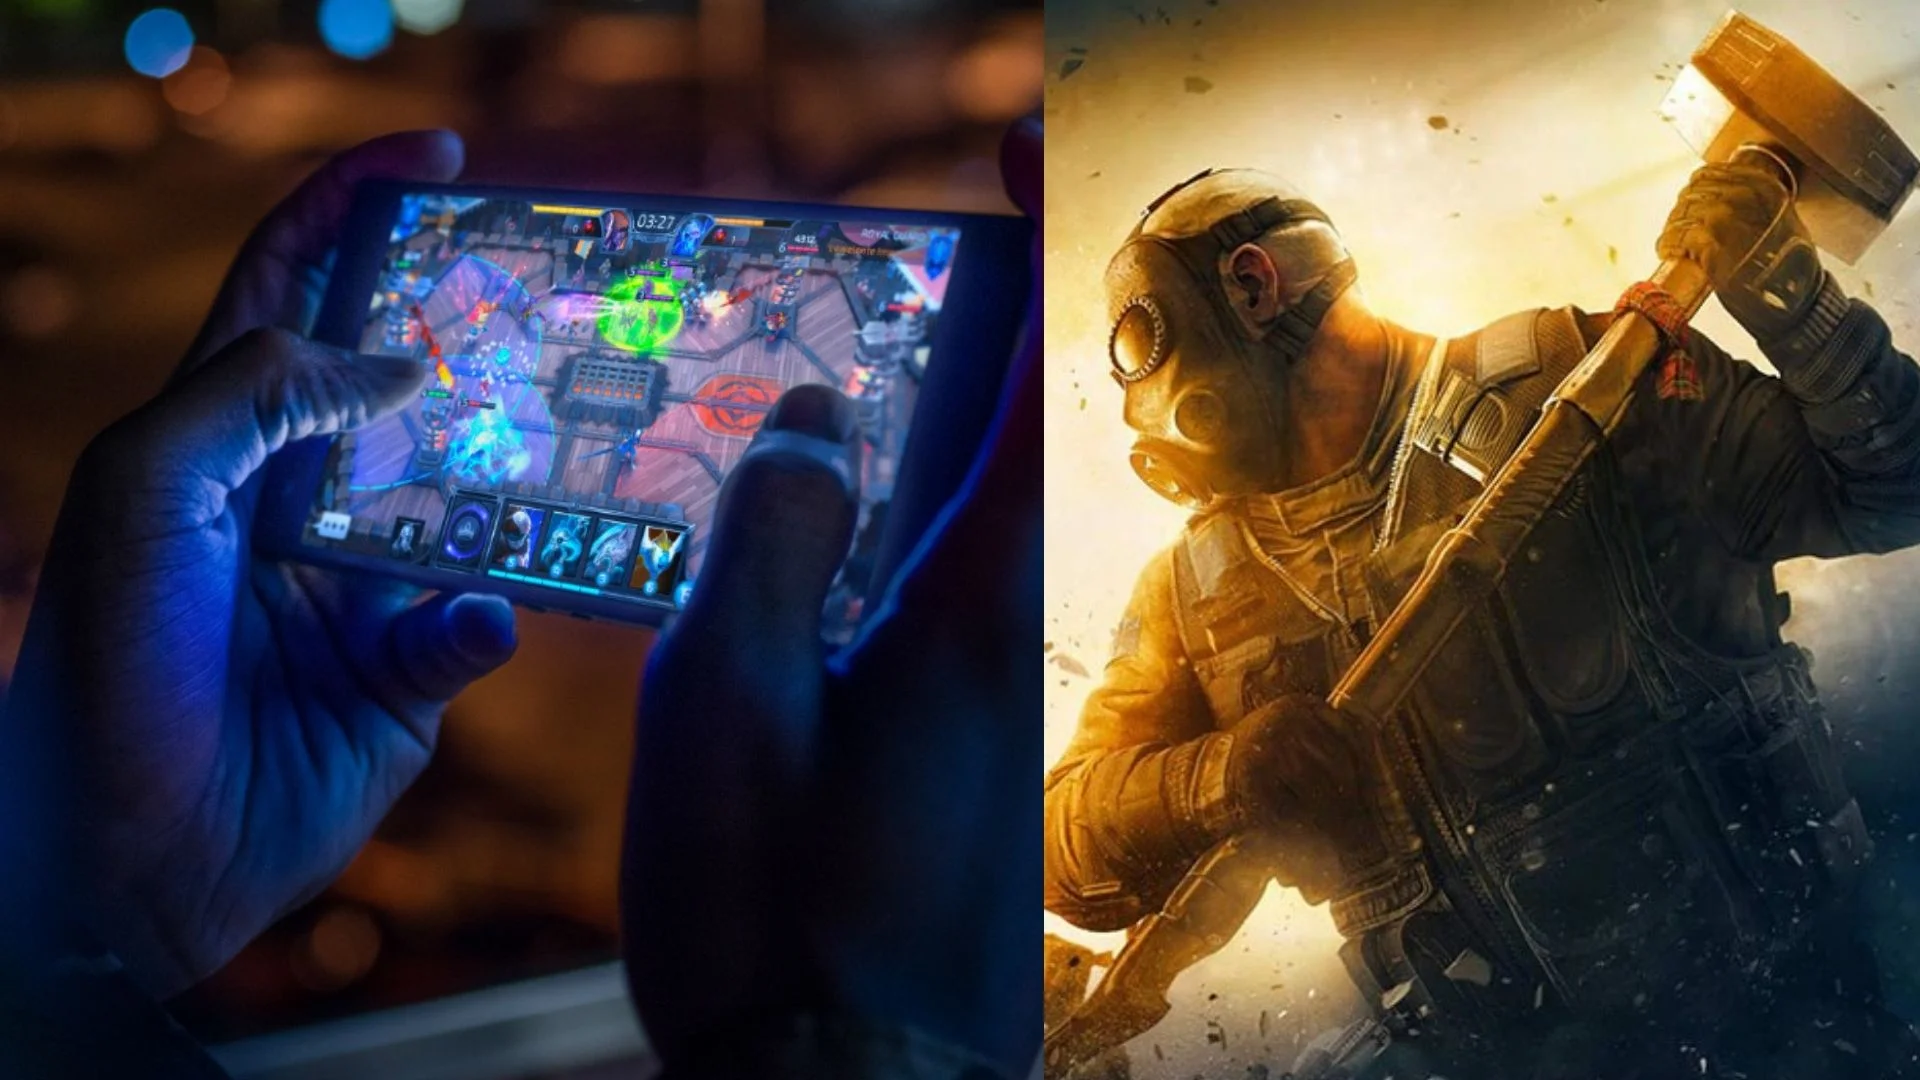 Rainbow 6 Mobile News on X: Rainbow Six Mobile will release